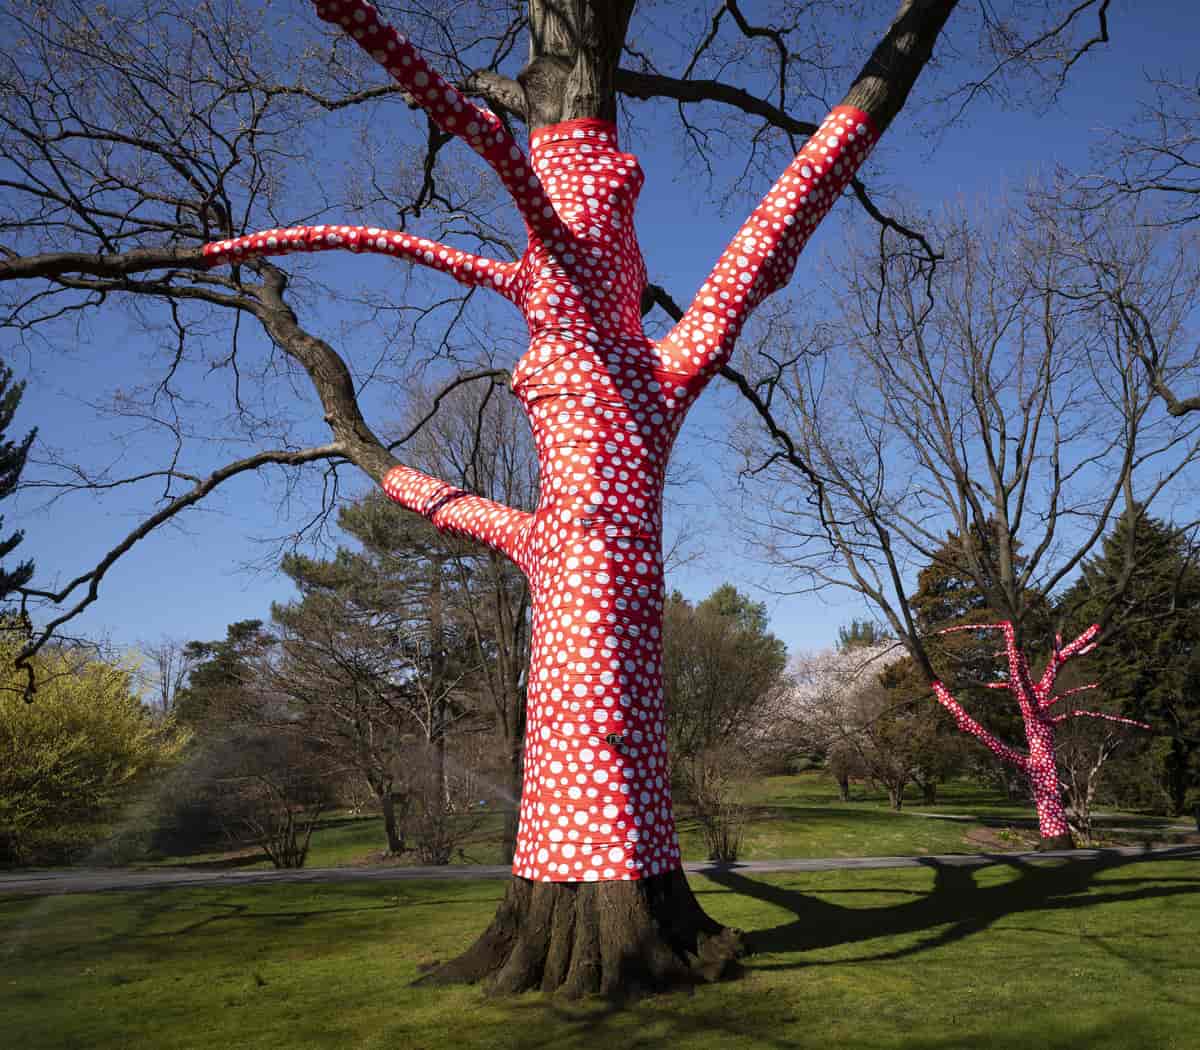 "Ascension of Polka Dots on the Trees" af Yayoi Kusama